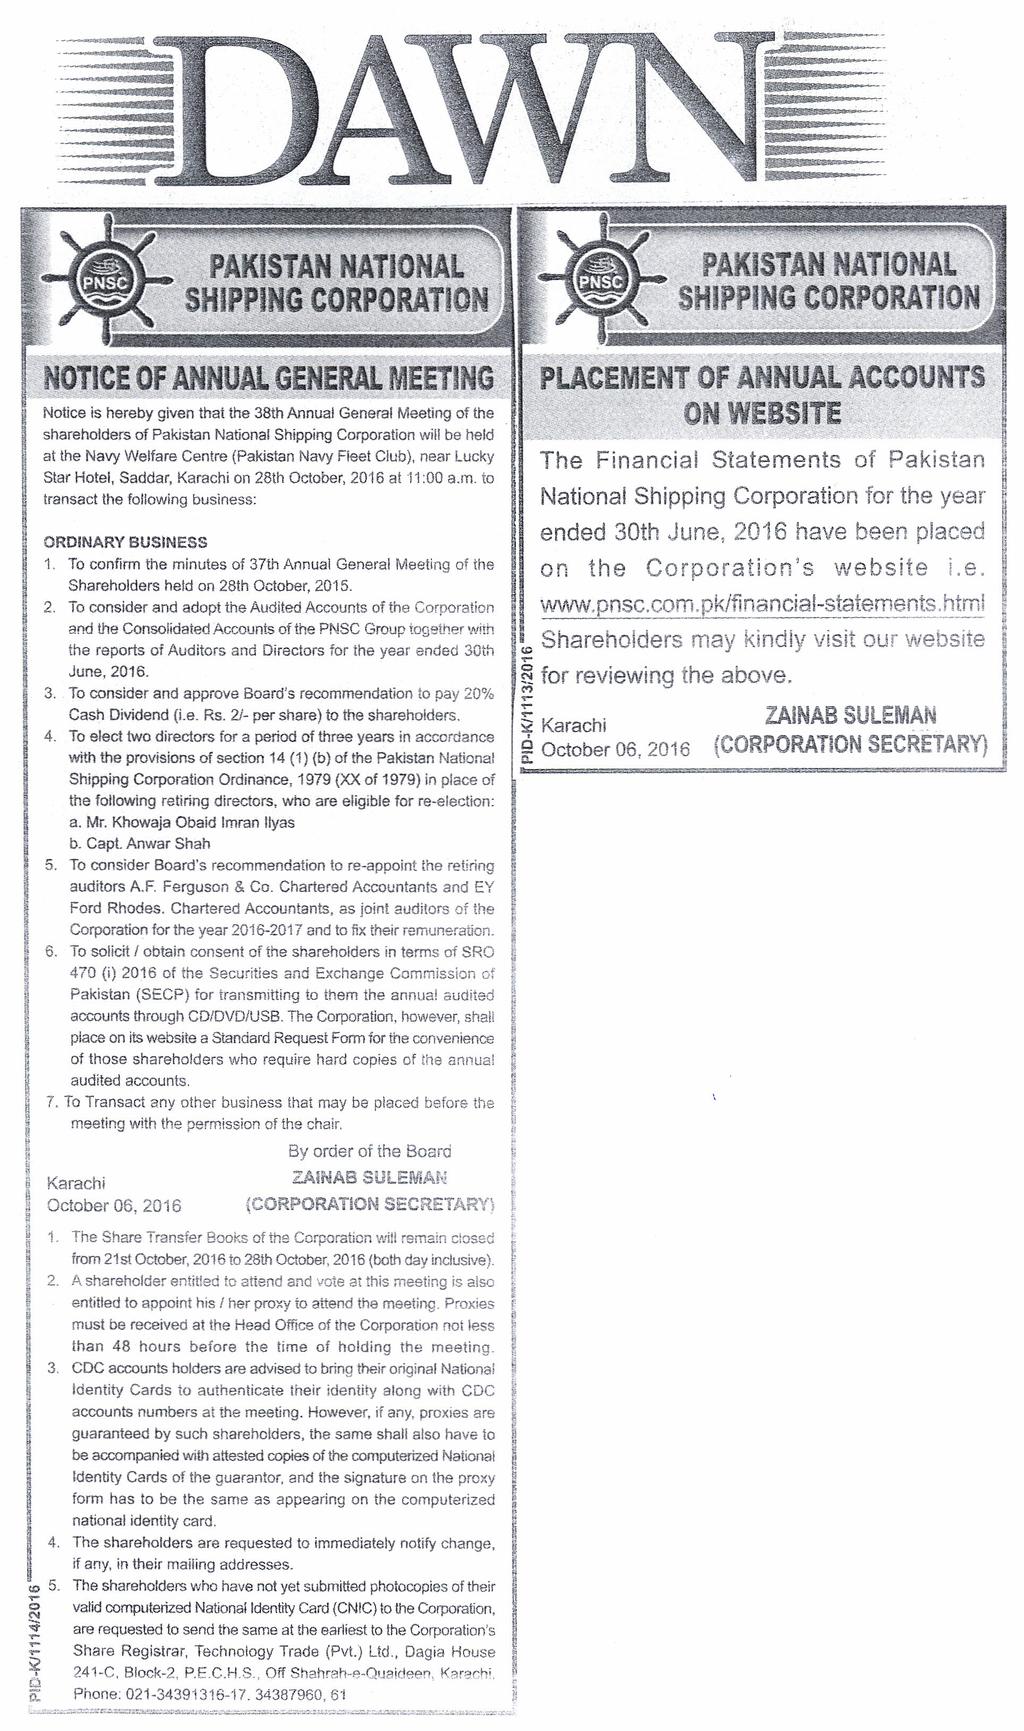 ORDINARY BUSINESS 1 To confirm the minutes of 37th Annual General Meeting of the Shareholders held on 28th October, 2015.